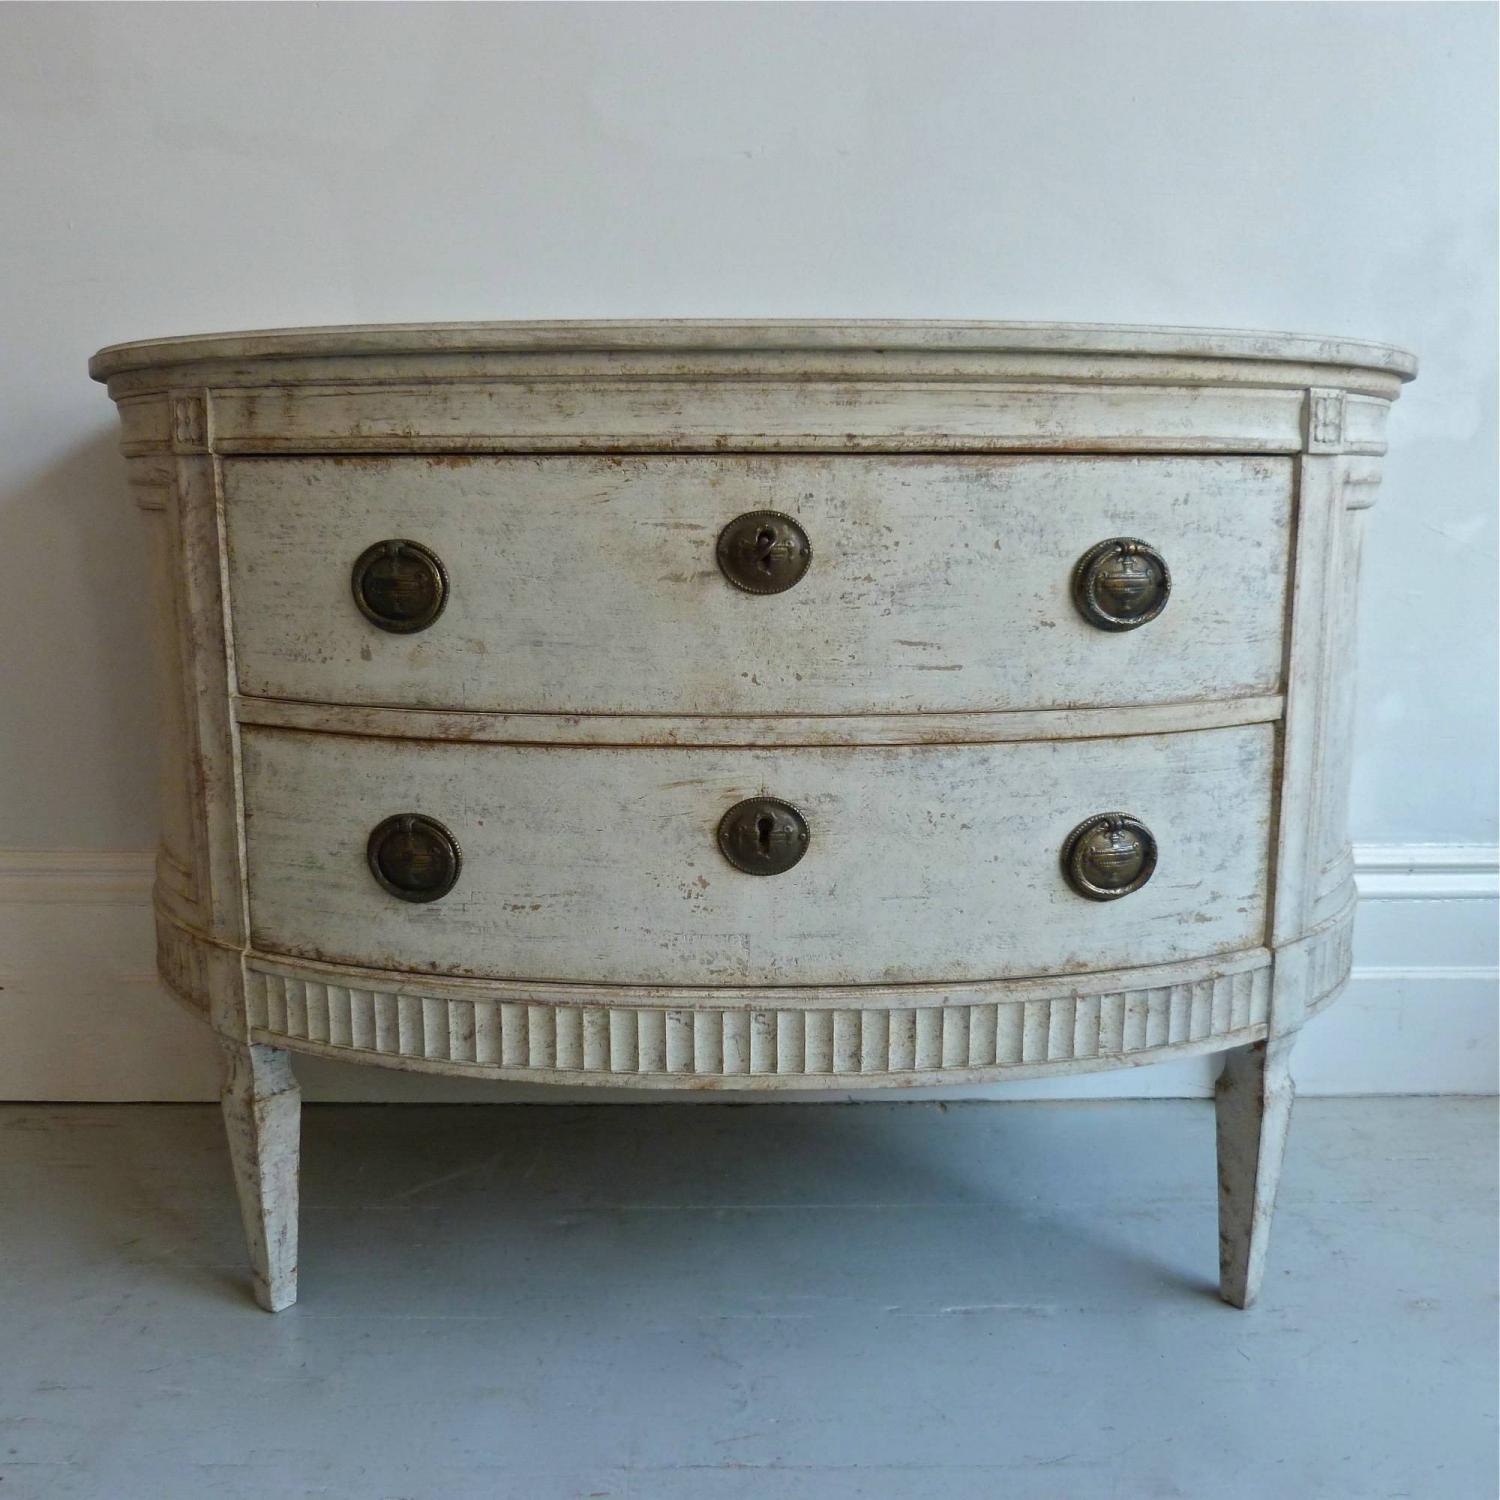 SMALL GUSTAVIAN STYLE DEMILUNE CHEST